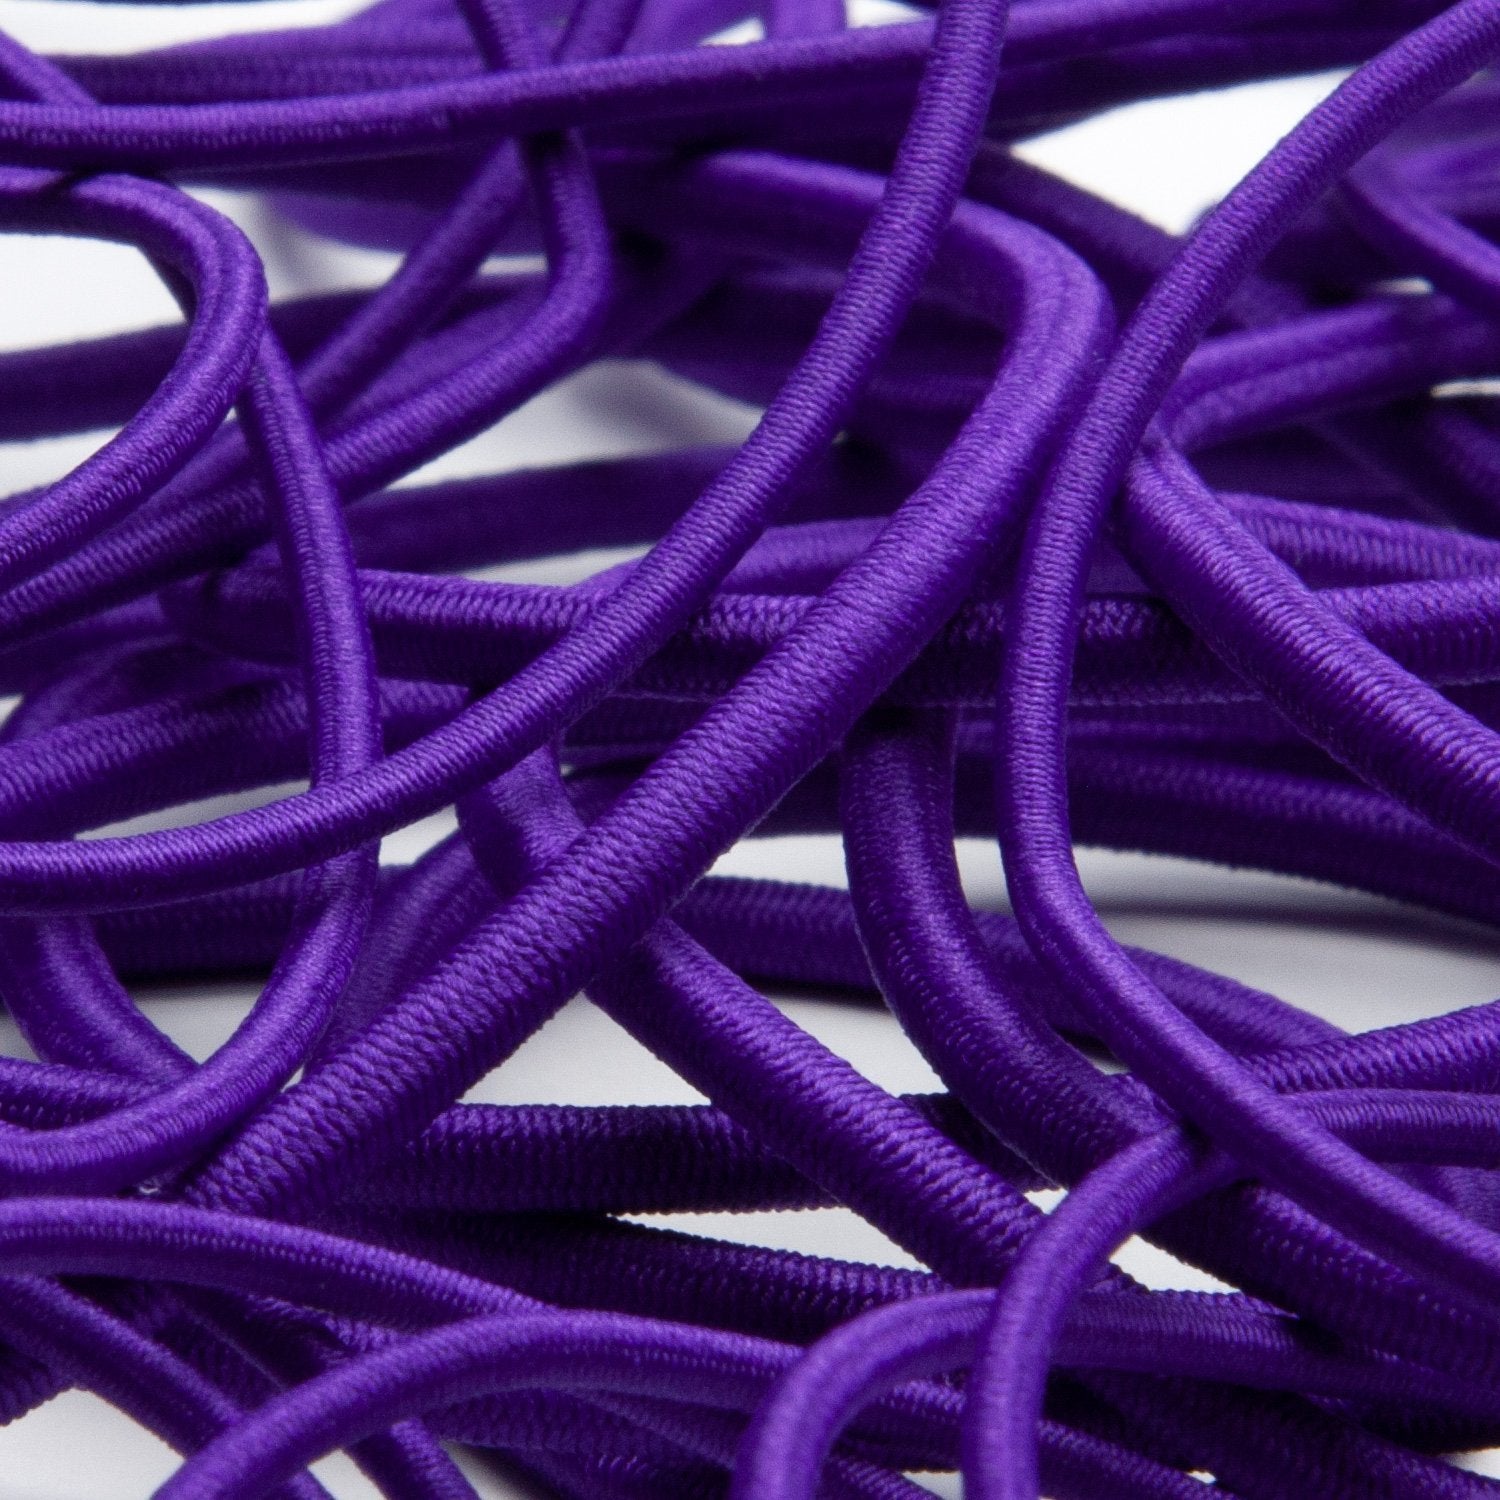 Wholesale] Polyester Elastic Cord 2mm (5/64) 50 Meters Roll